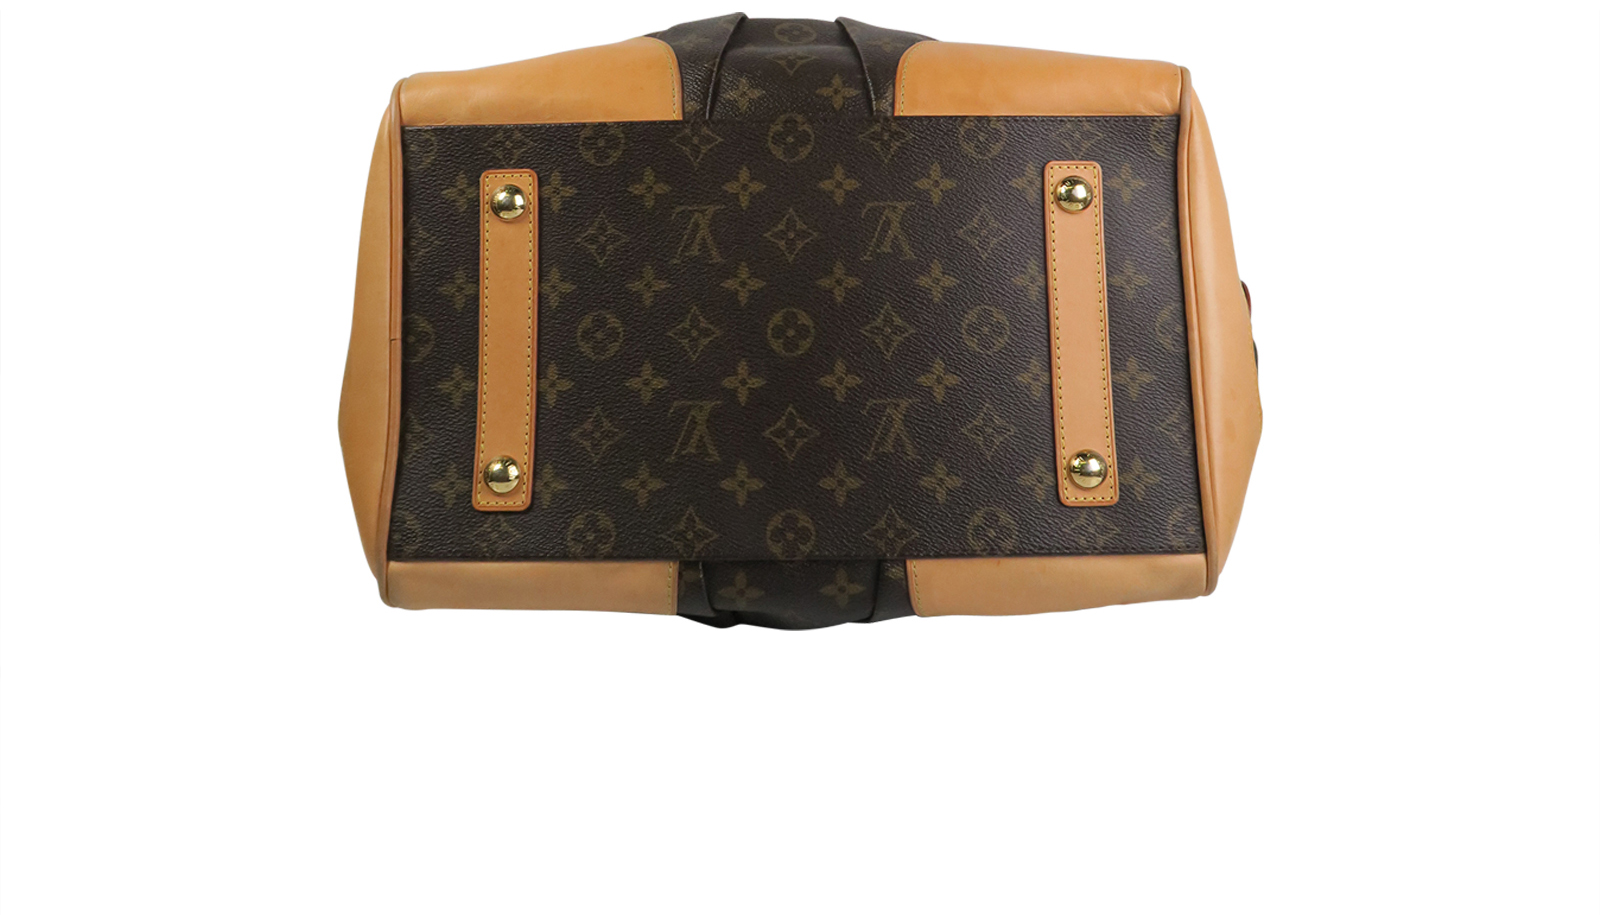 Stephen sprouse boston cloth tote Louis Vuitton Brown in Cloth - 20104516